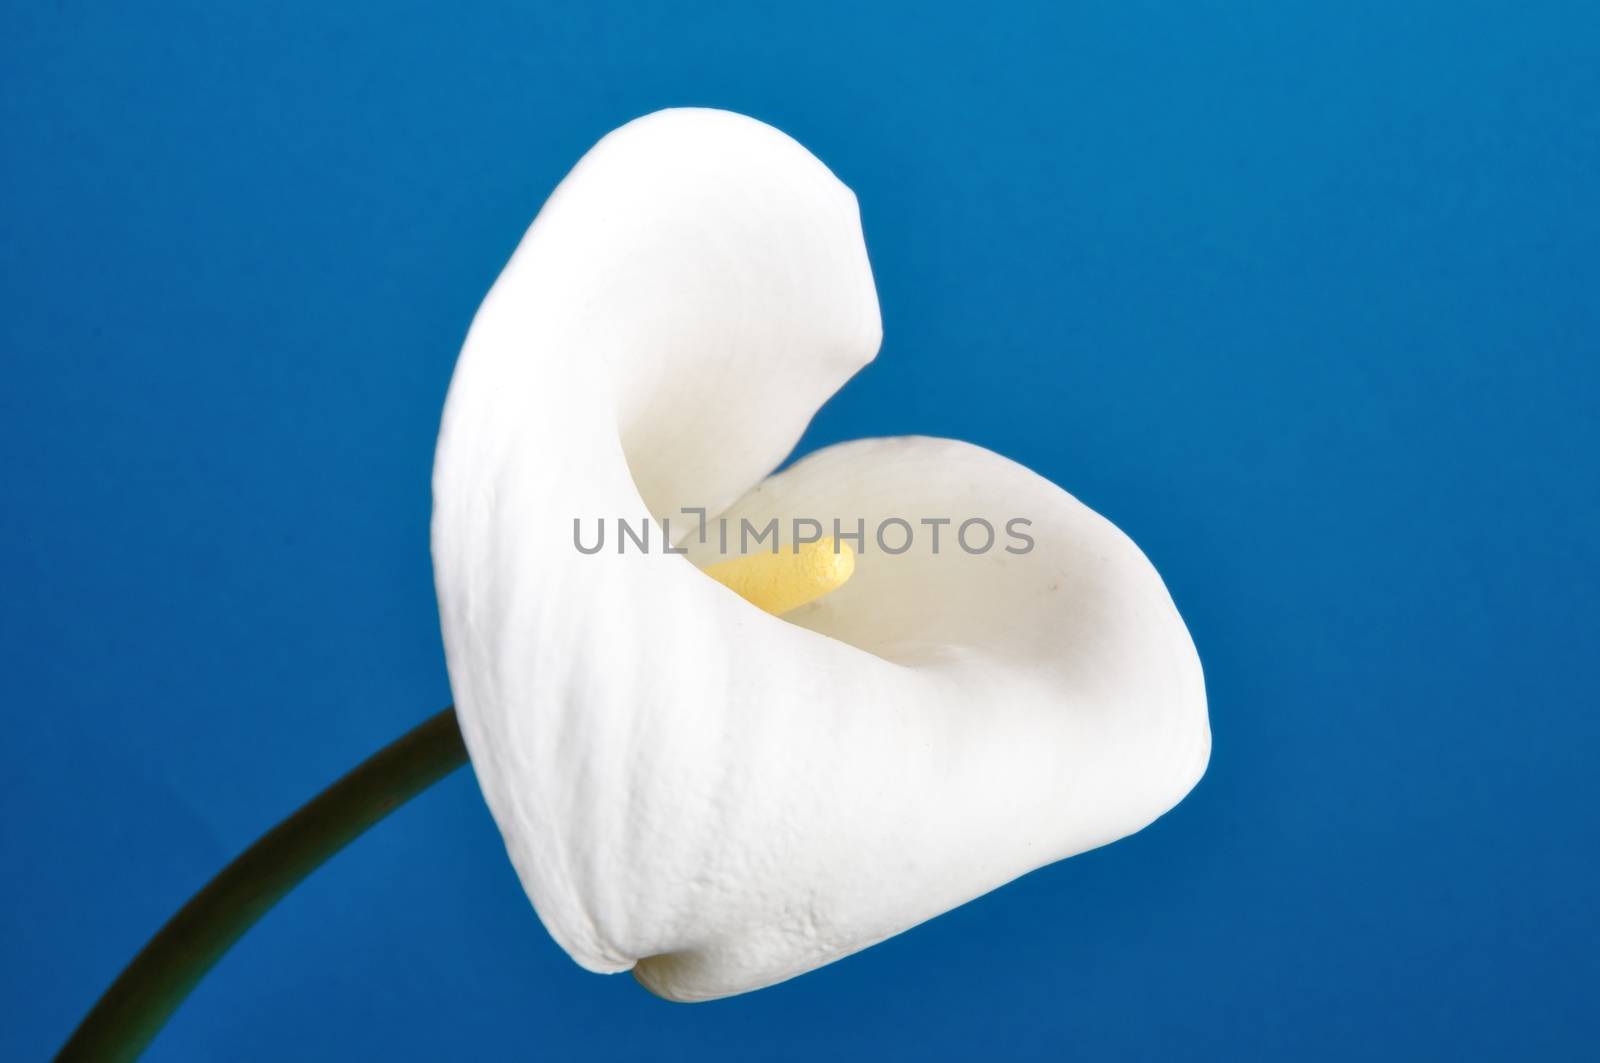 Arum lily by BZH22